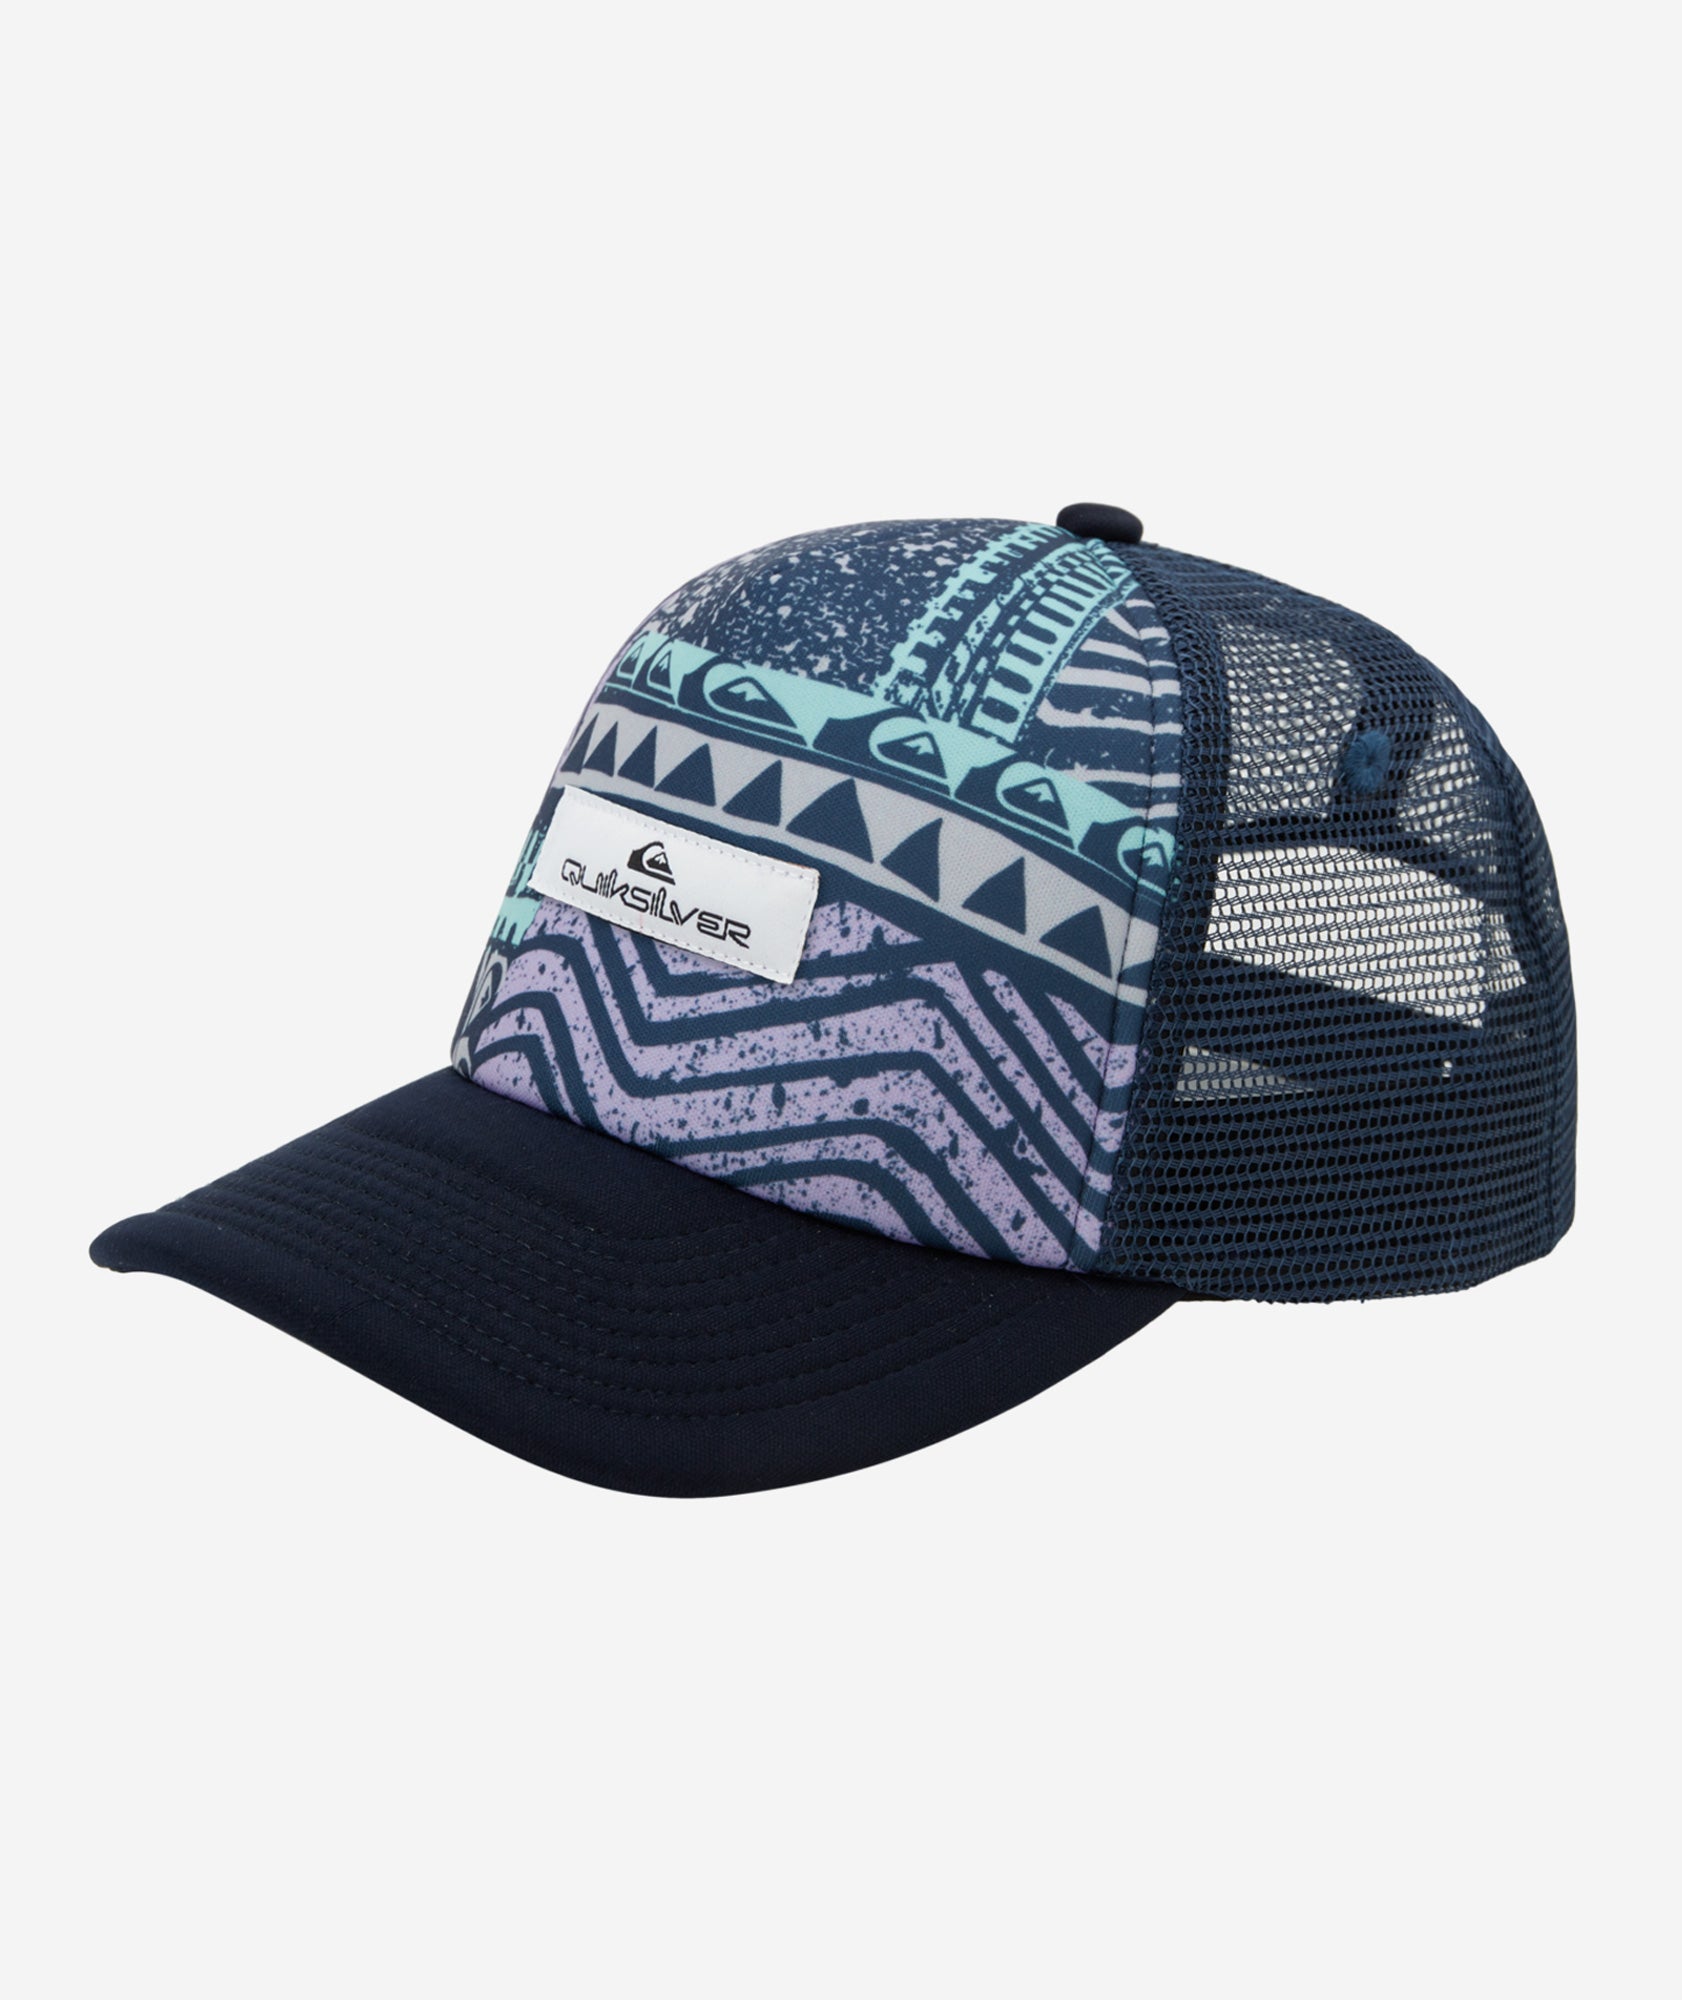 The Buzzard Coop trucker hat earns its stripes with 5-panel foam construction and sunset-hued bands of colors. Snapback closure lets you create a personalized fit.